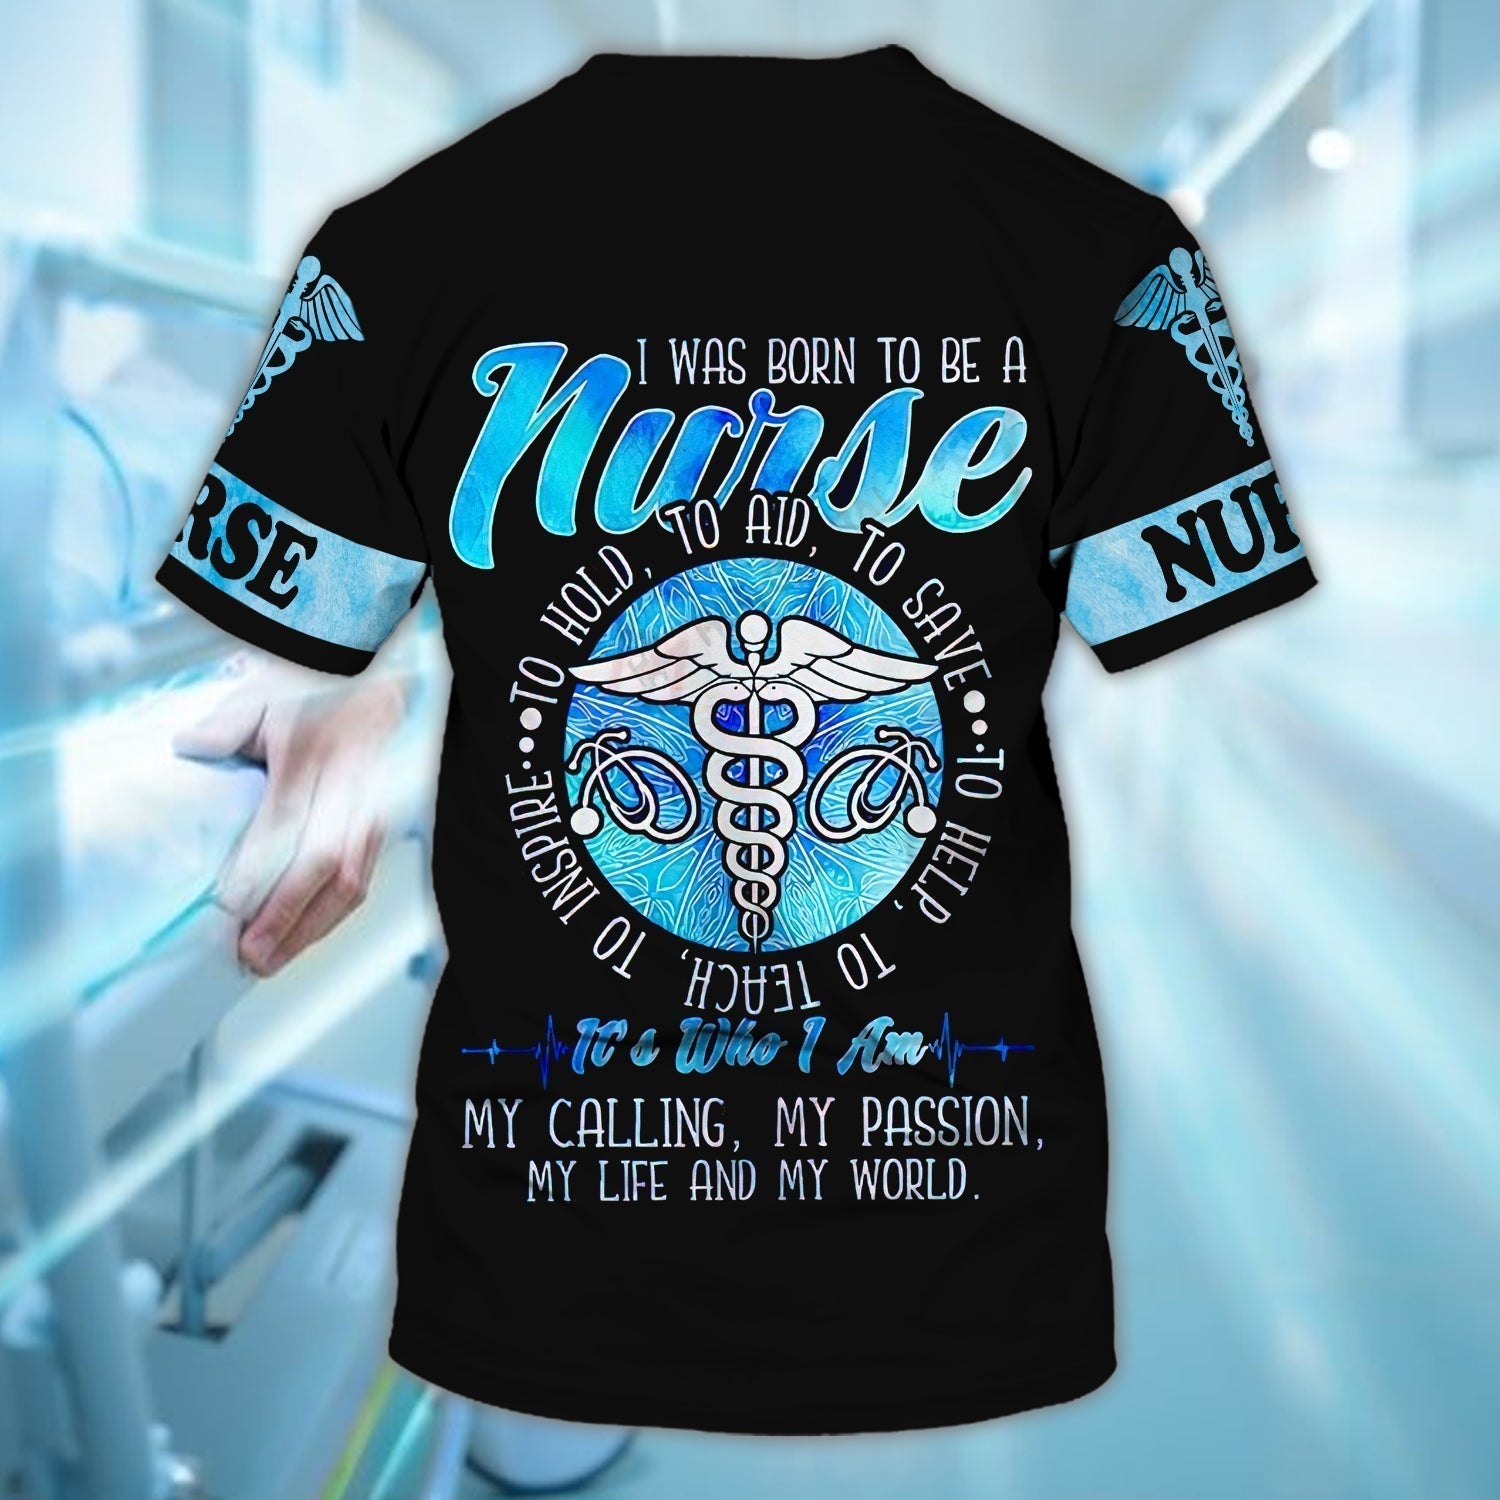 Customized 3D All Over Printed Shirts For A Nurse To be a Nurse Tee Shirts